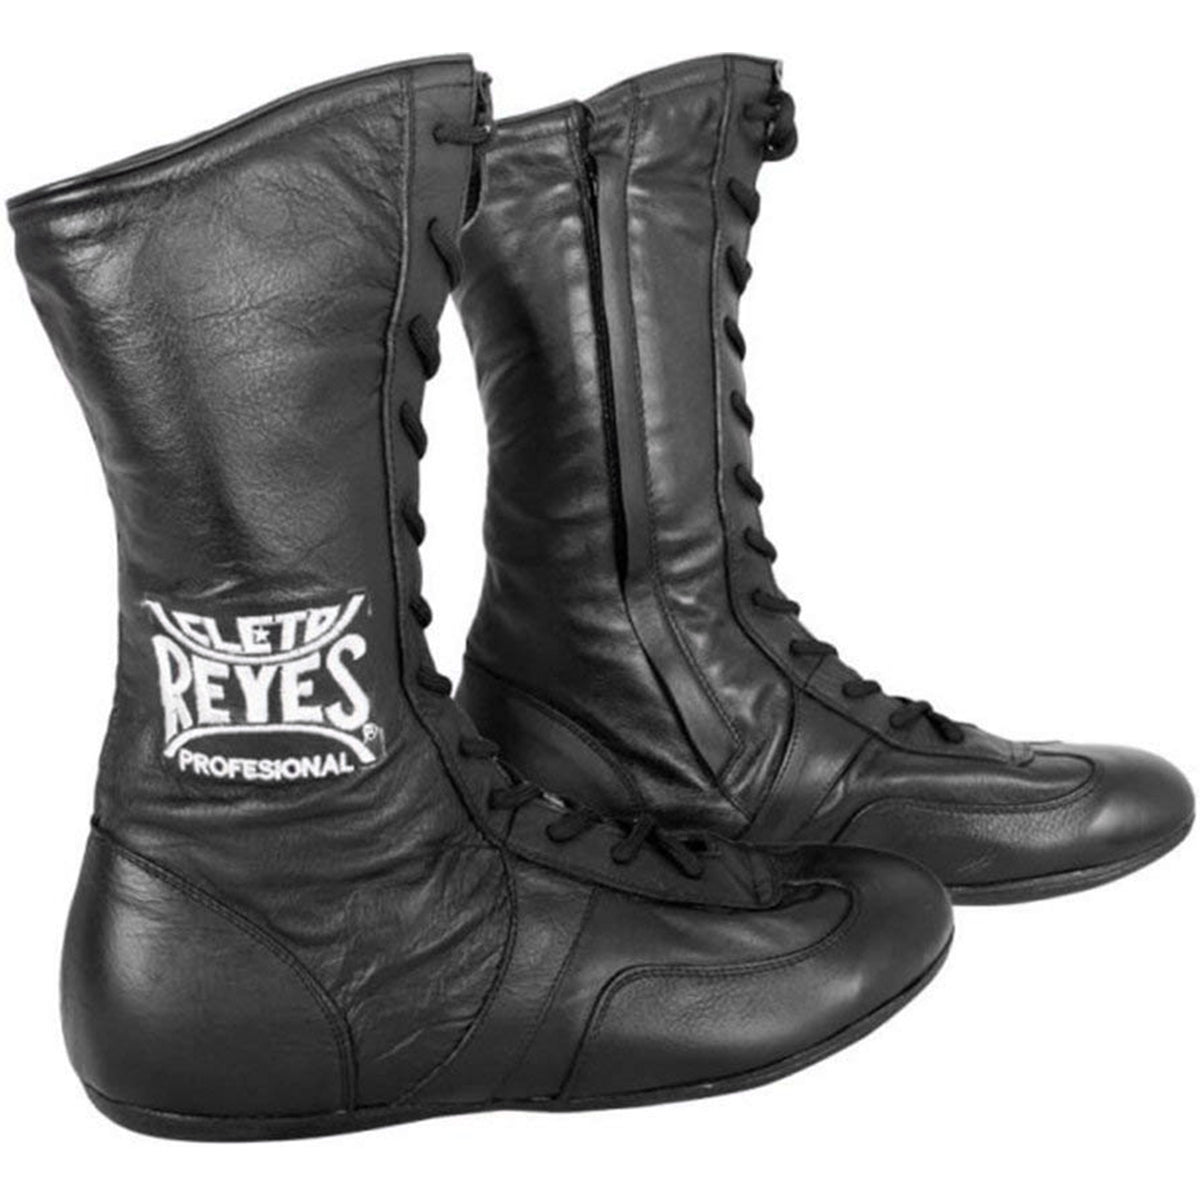 Cleto Reyes Leather Lace Up High Top Boxing Shoes - Size: 12 - Black Cleto Reyes